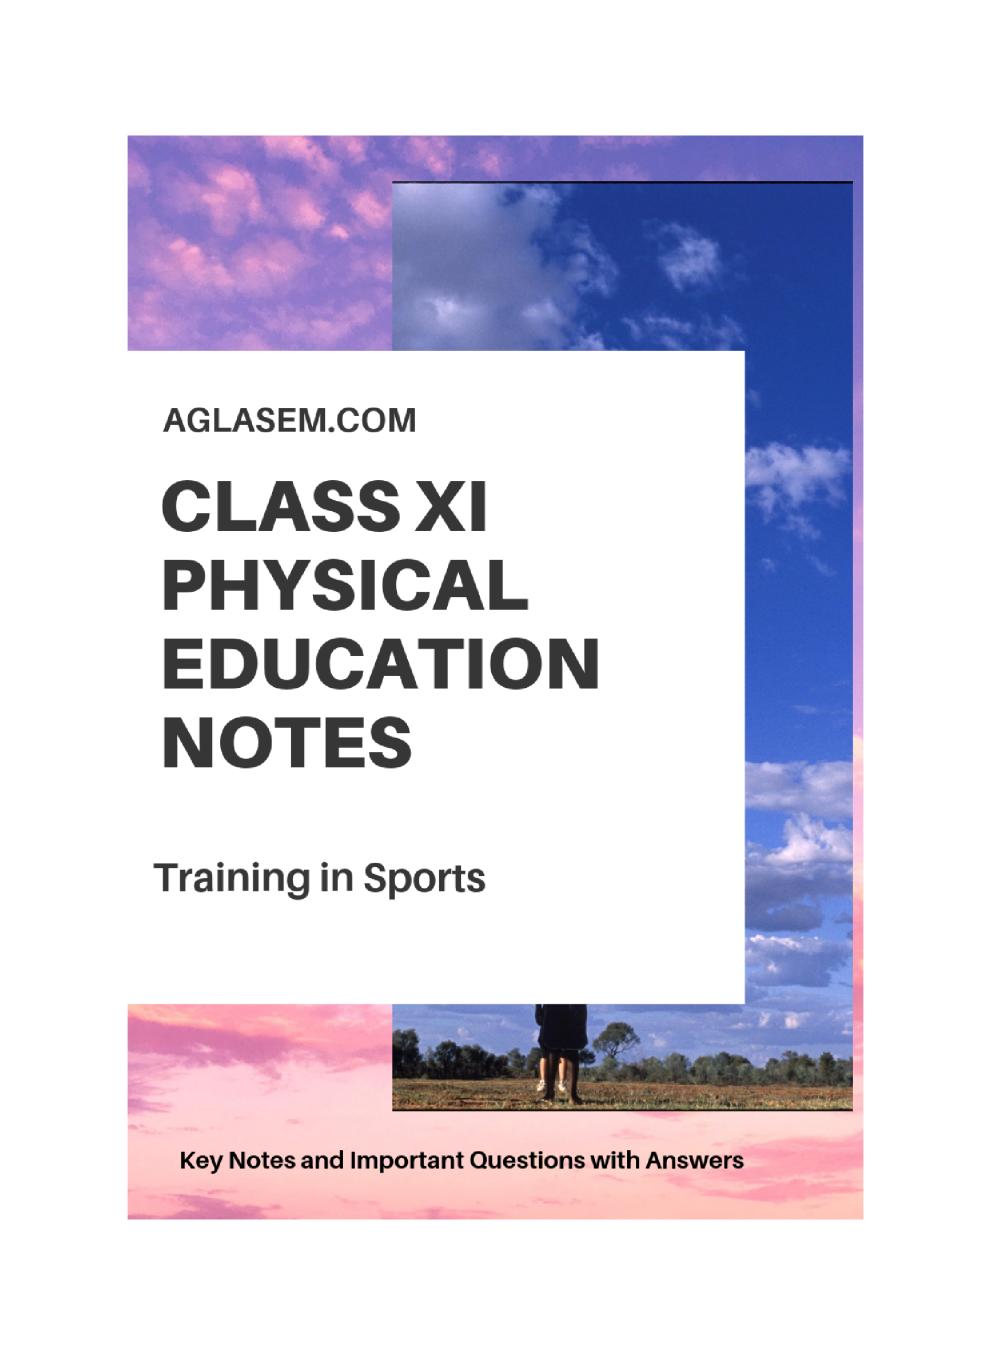 Class 11 Physical Education Notes for Training in Sports - Page 1